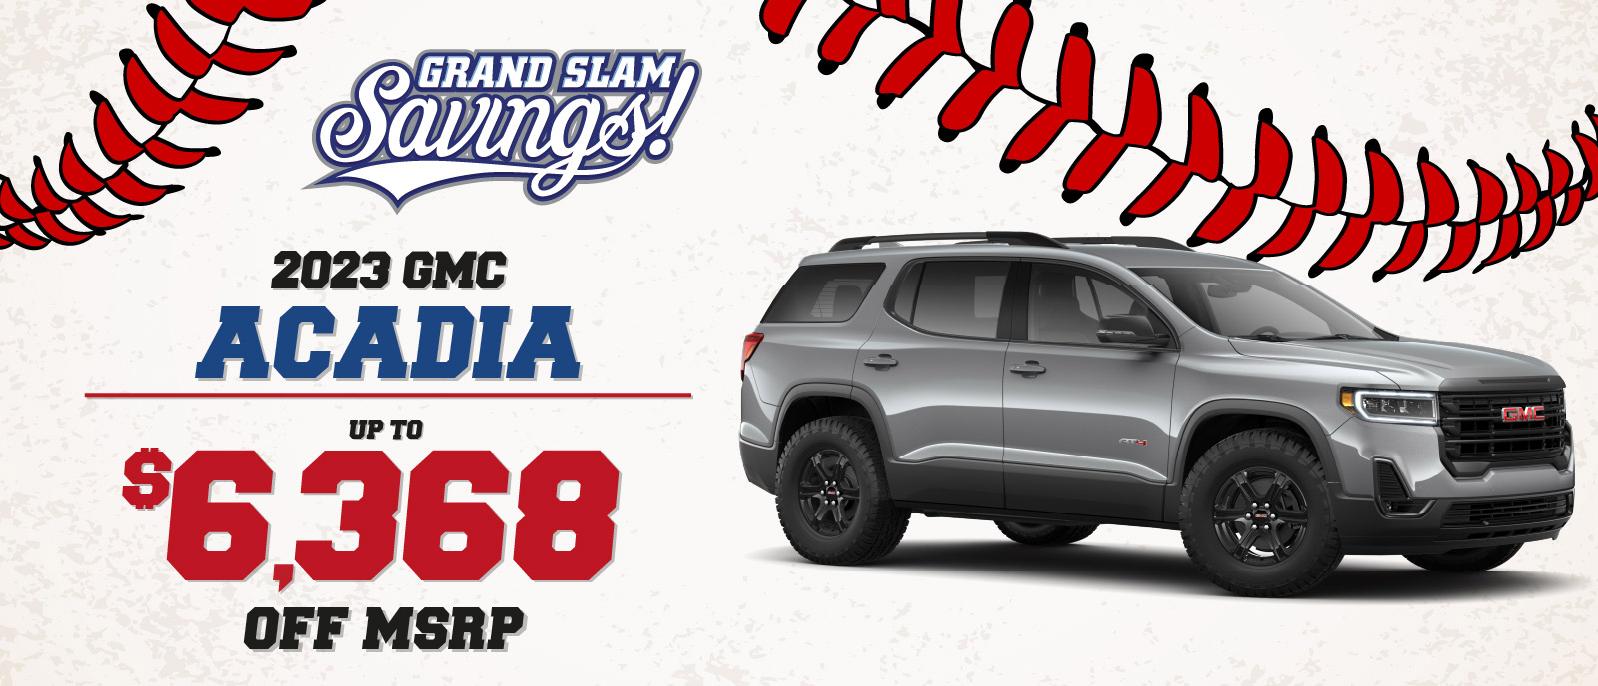 2023 GMC Acadia - up to $6368 off MSRP